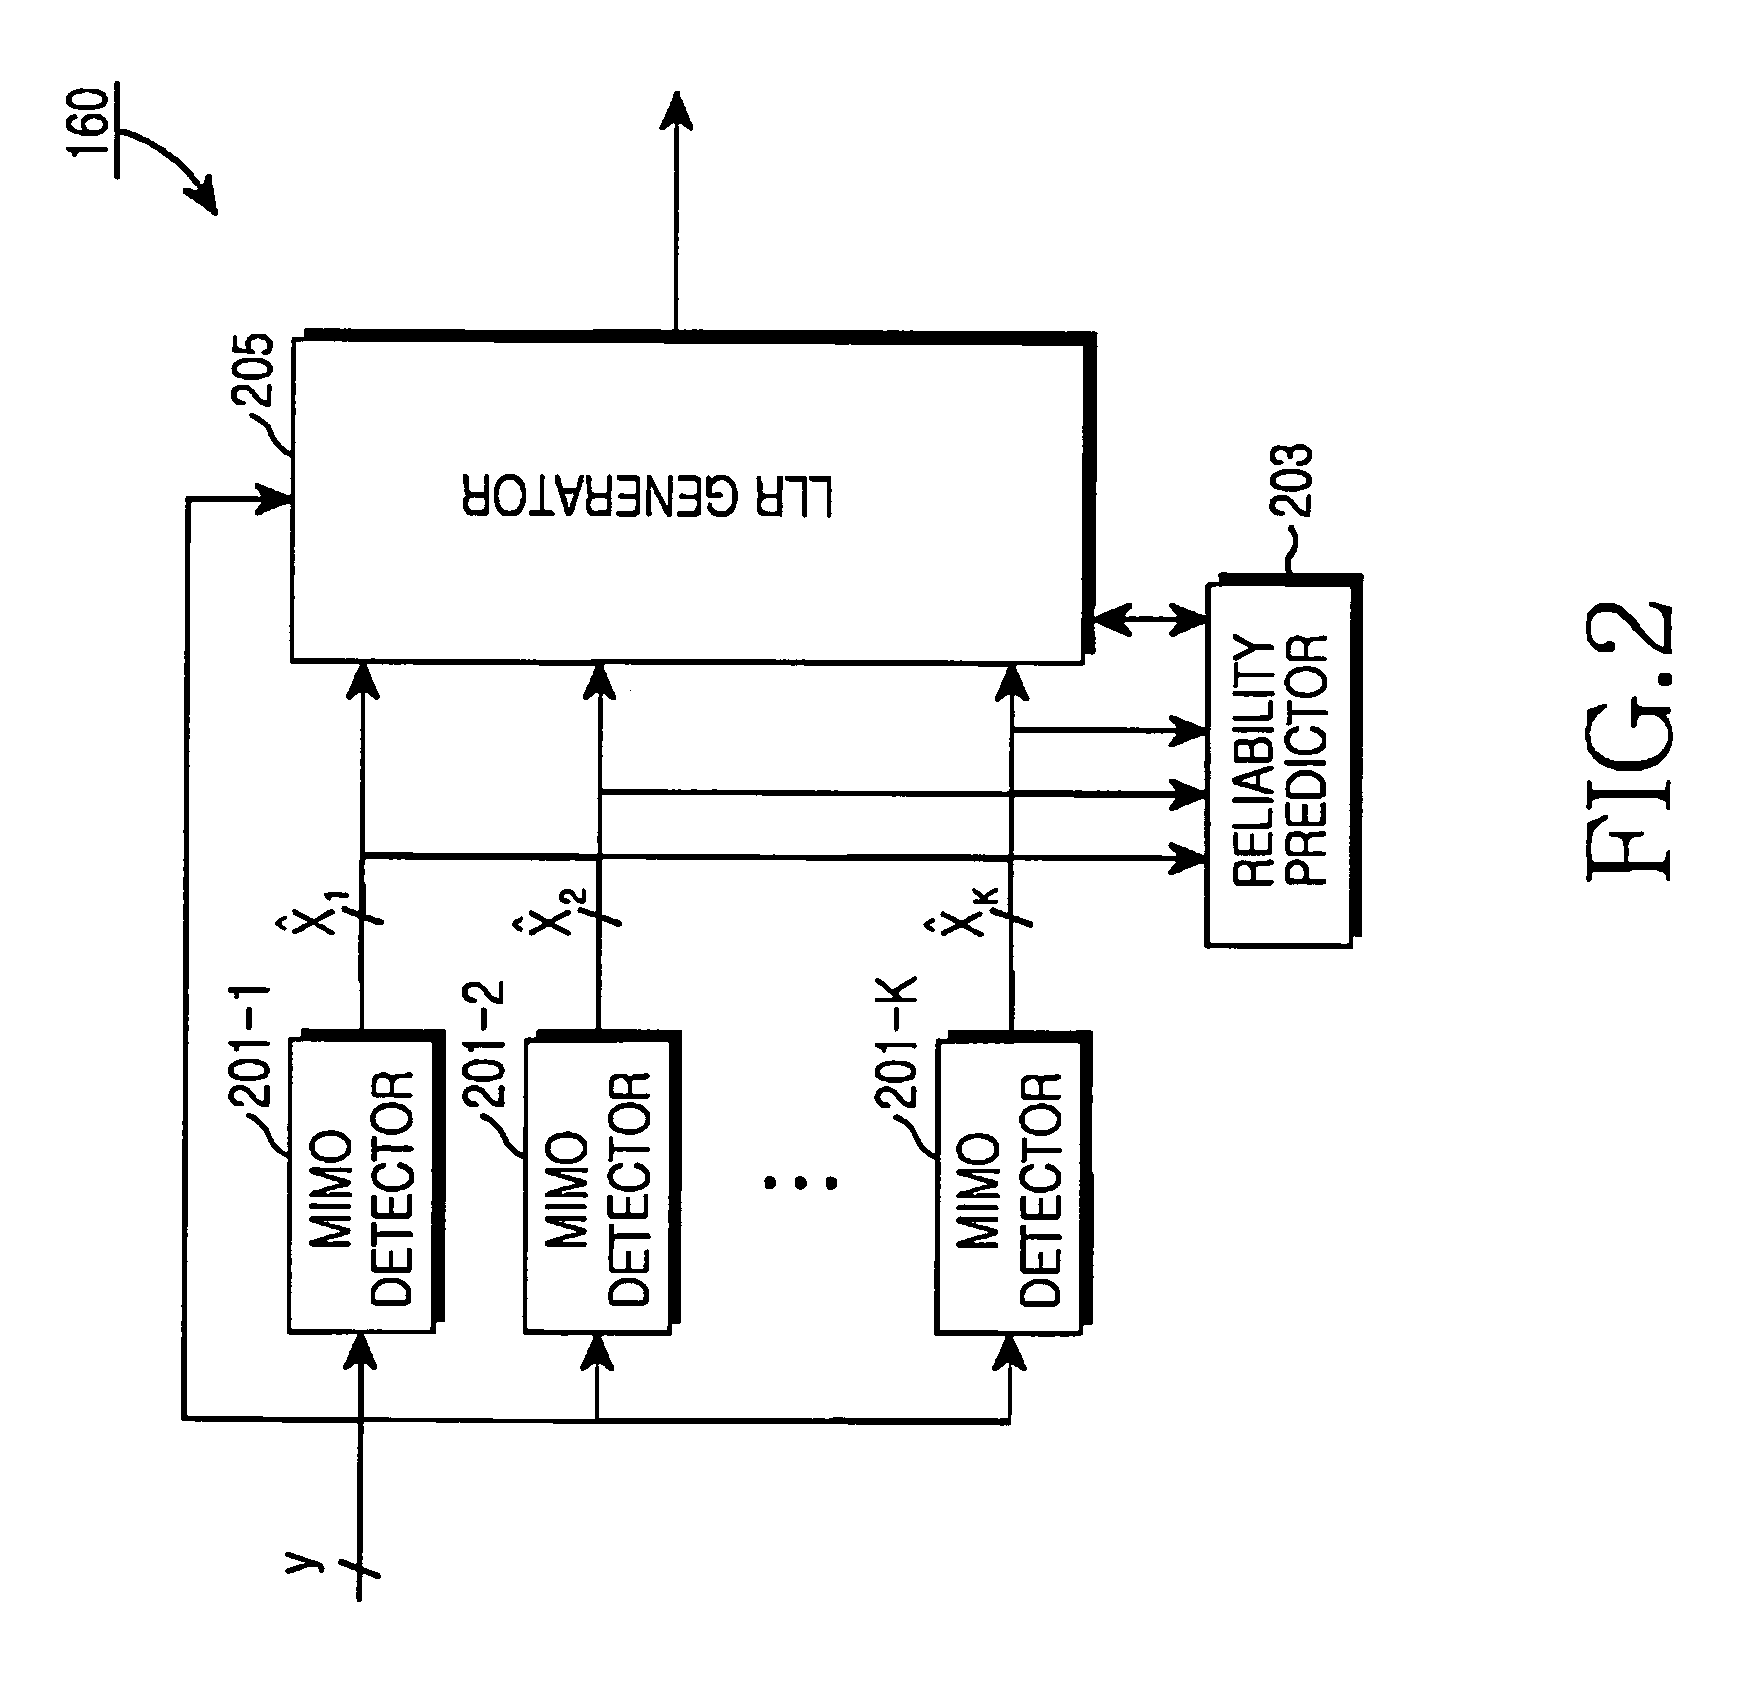 Log-likelihood ration (LLR) generating apparatus and method in Multiple Input Multiple Output (MIMO) antenna communication system